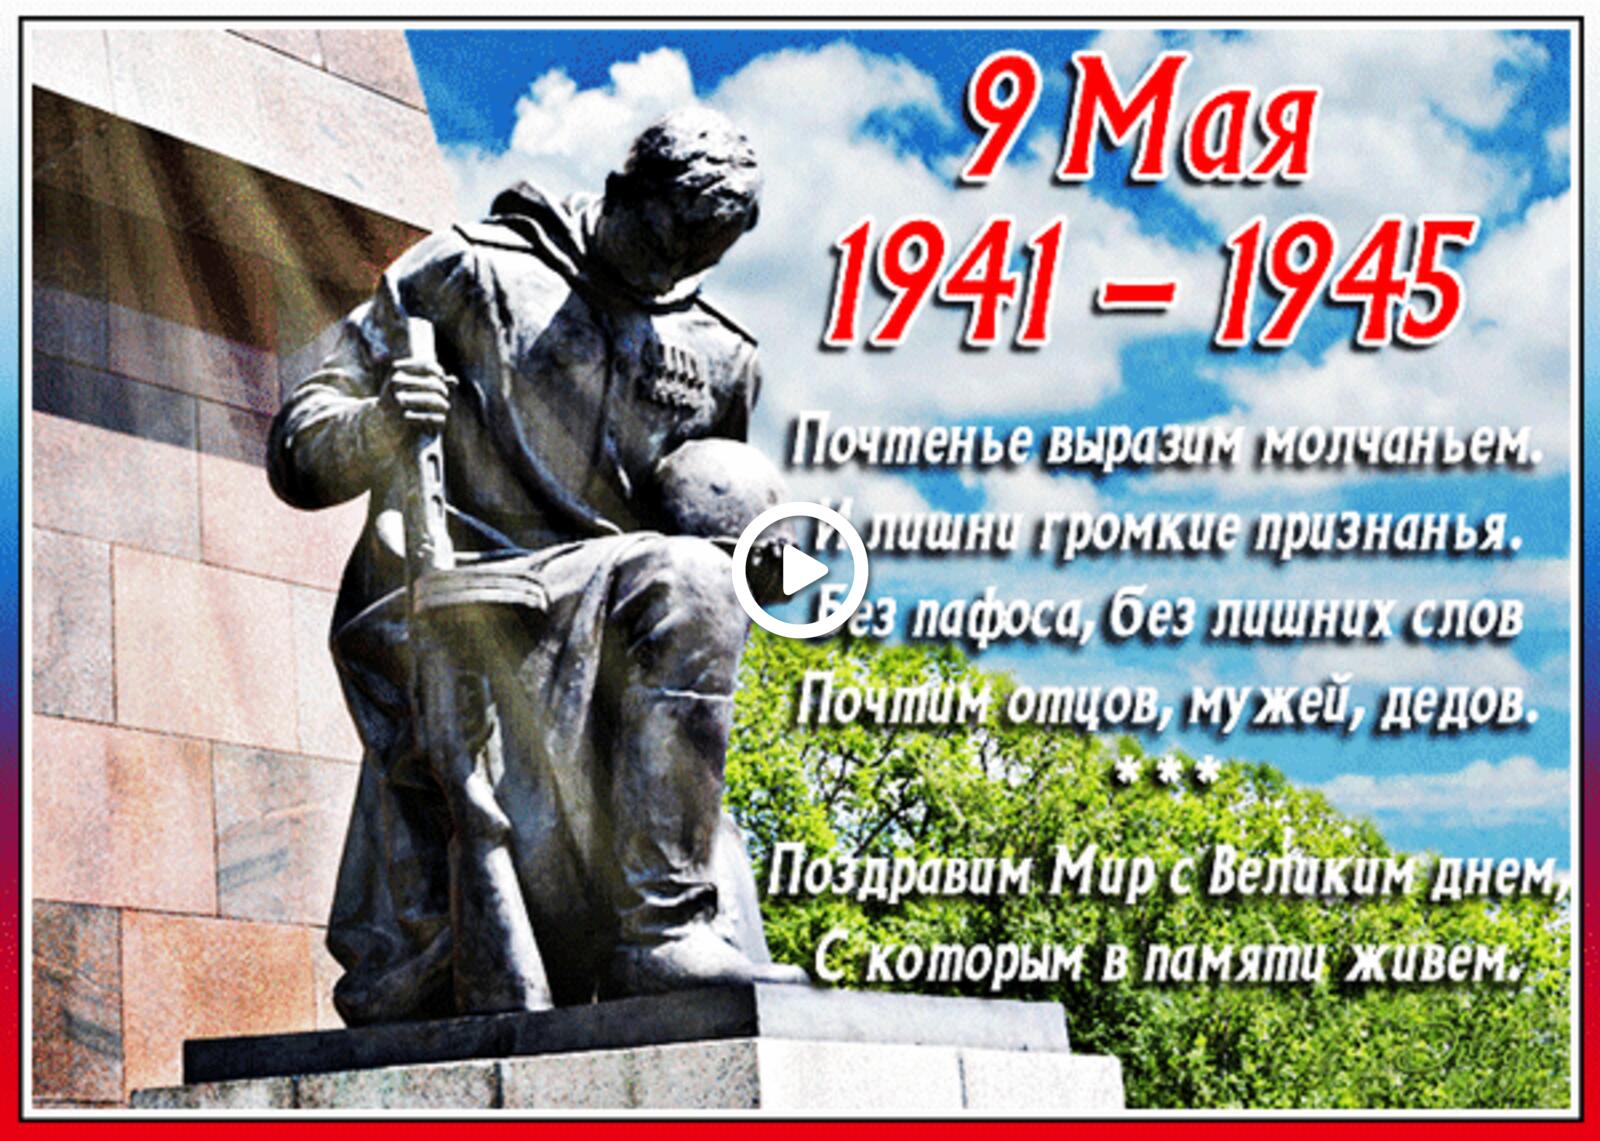 A postcard on the subject of victory day holidays congratulation for free